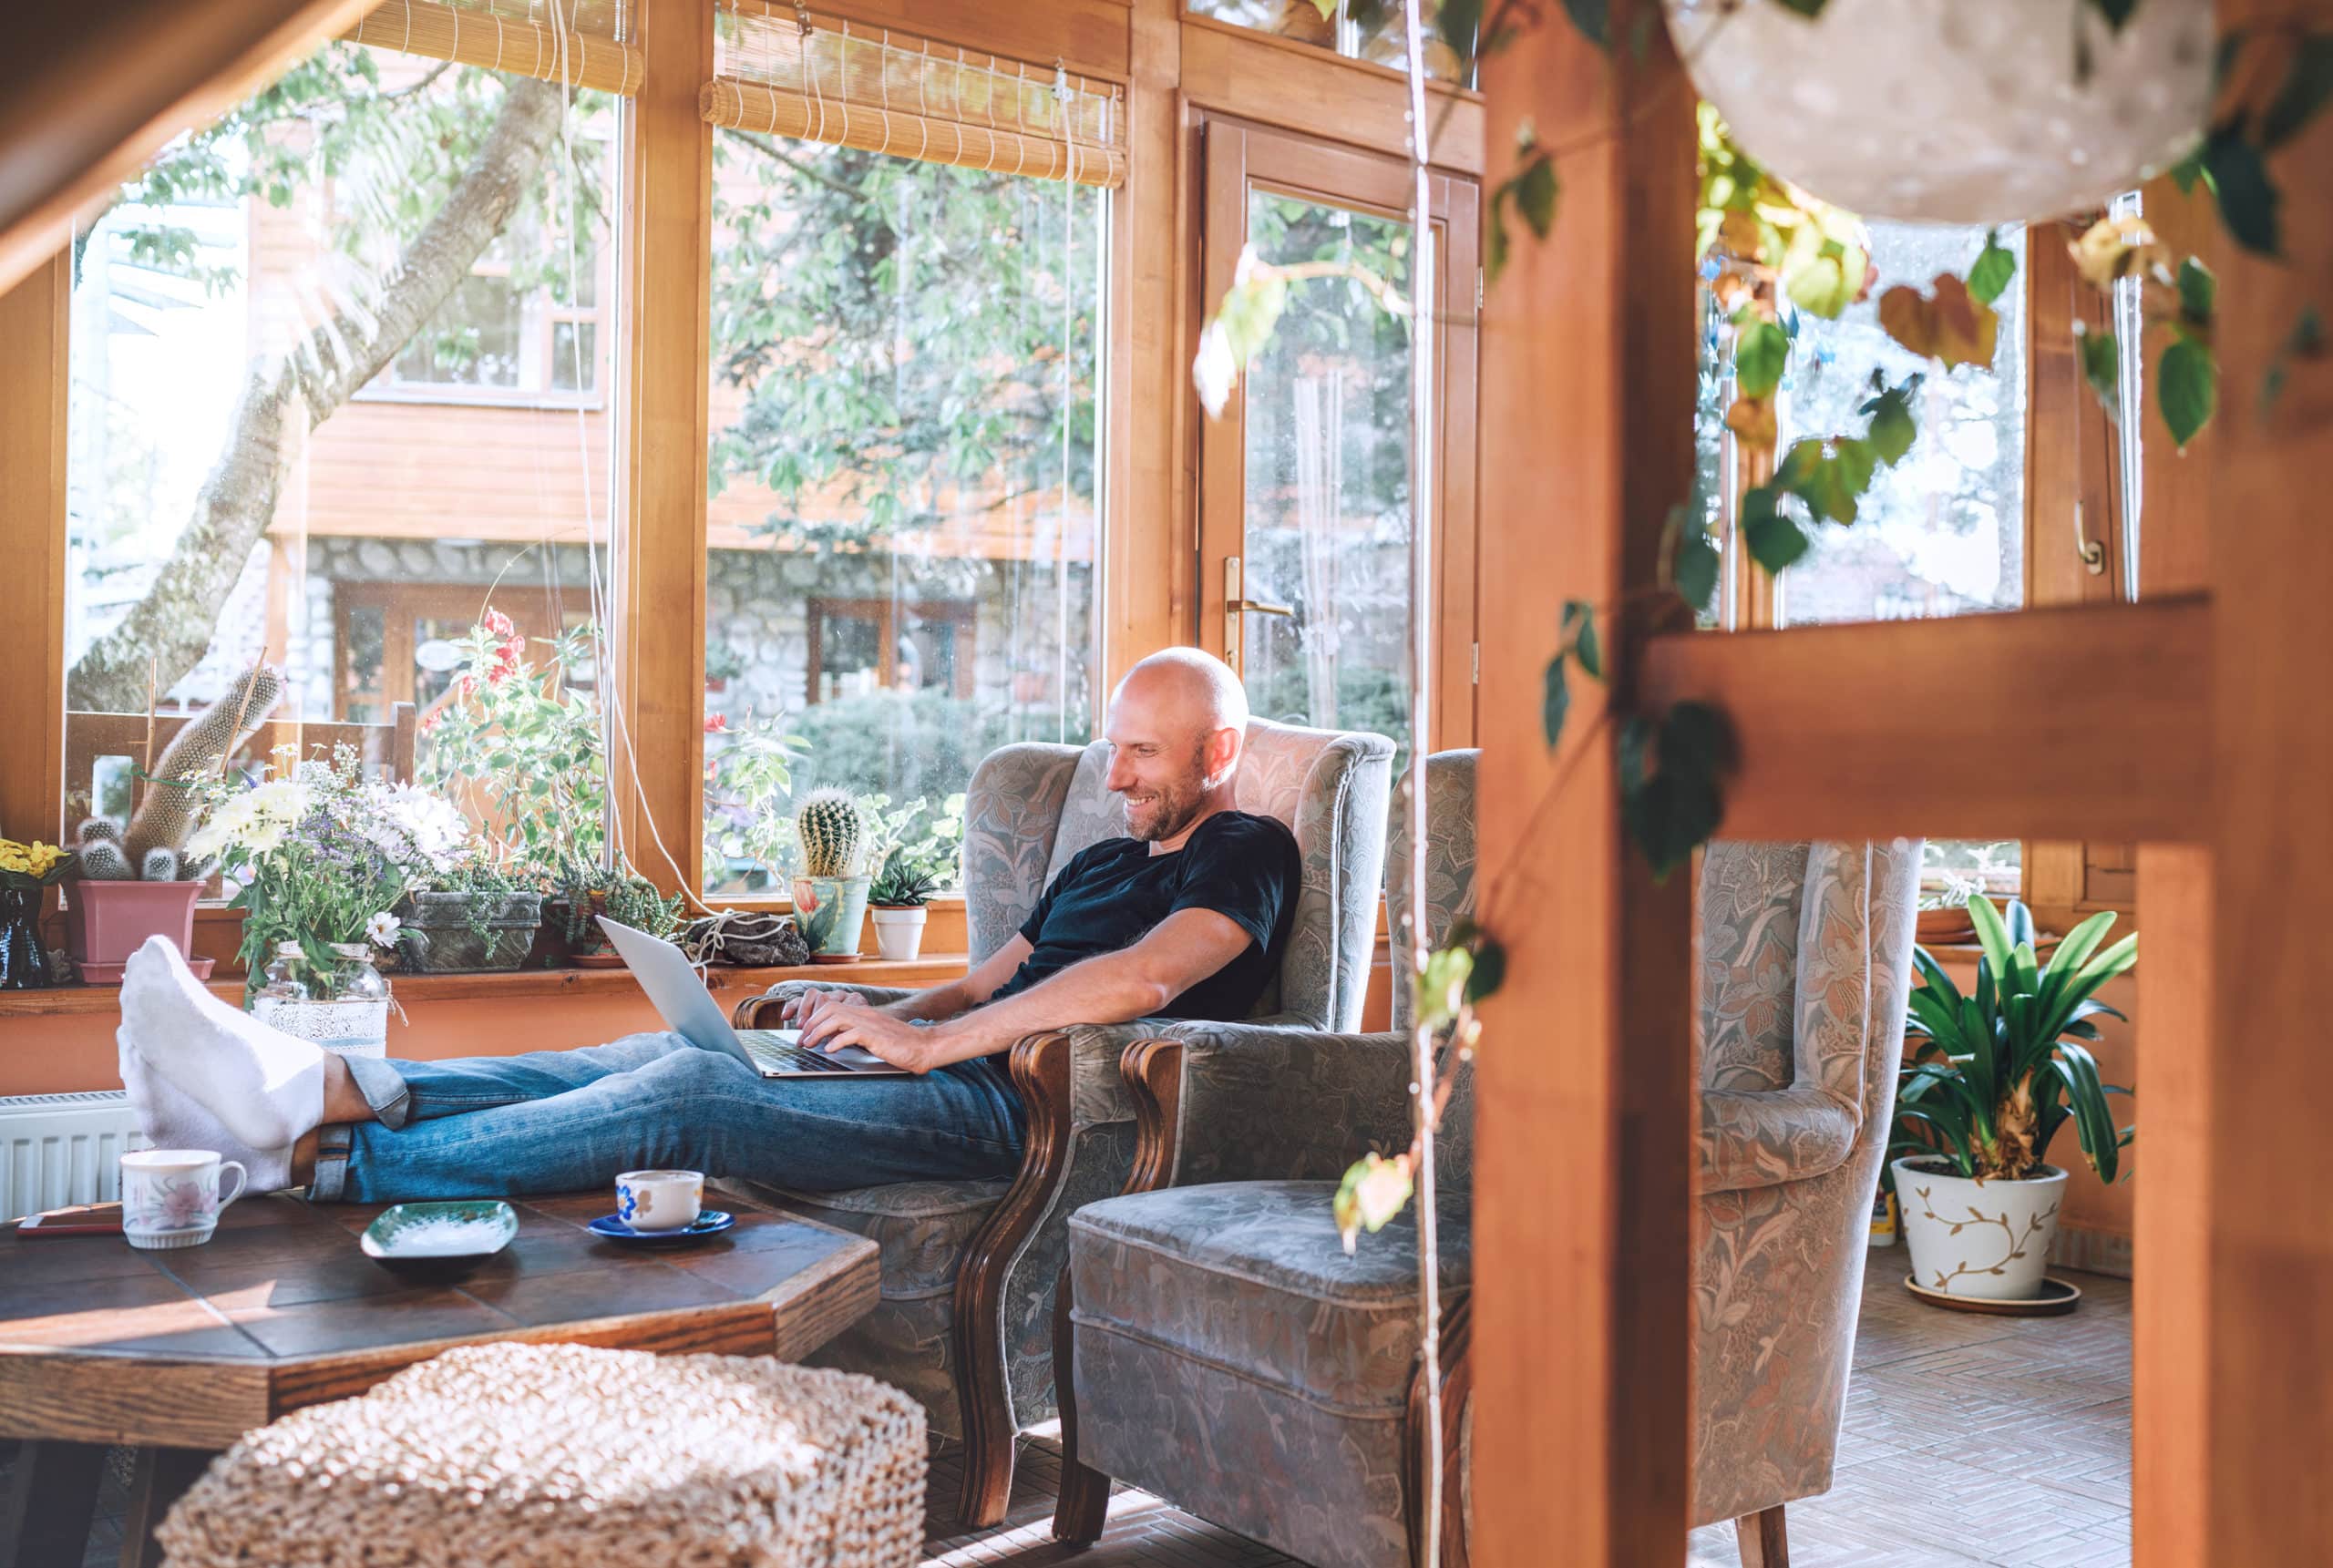 A man wearing a black shirt lounges in his beautiful sunroom with natural wood beams while building a website on his laptop for his job as a sunroom builder.